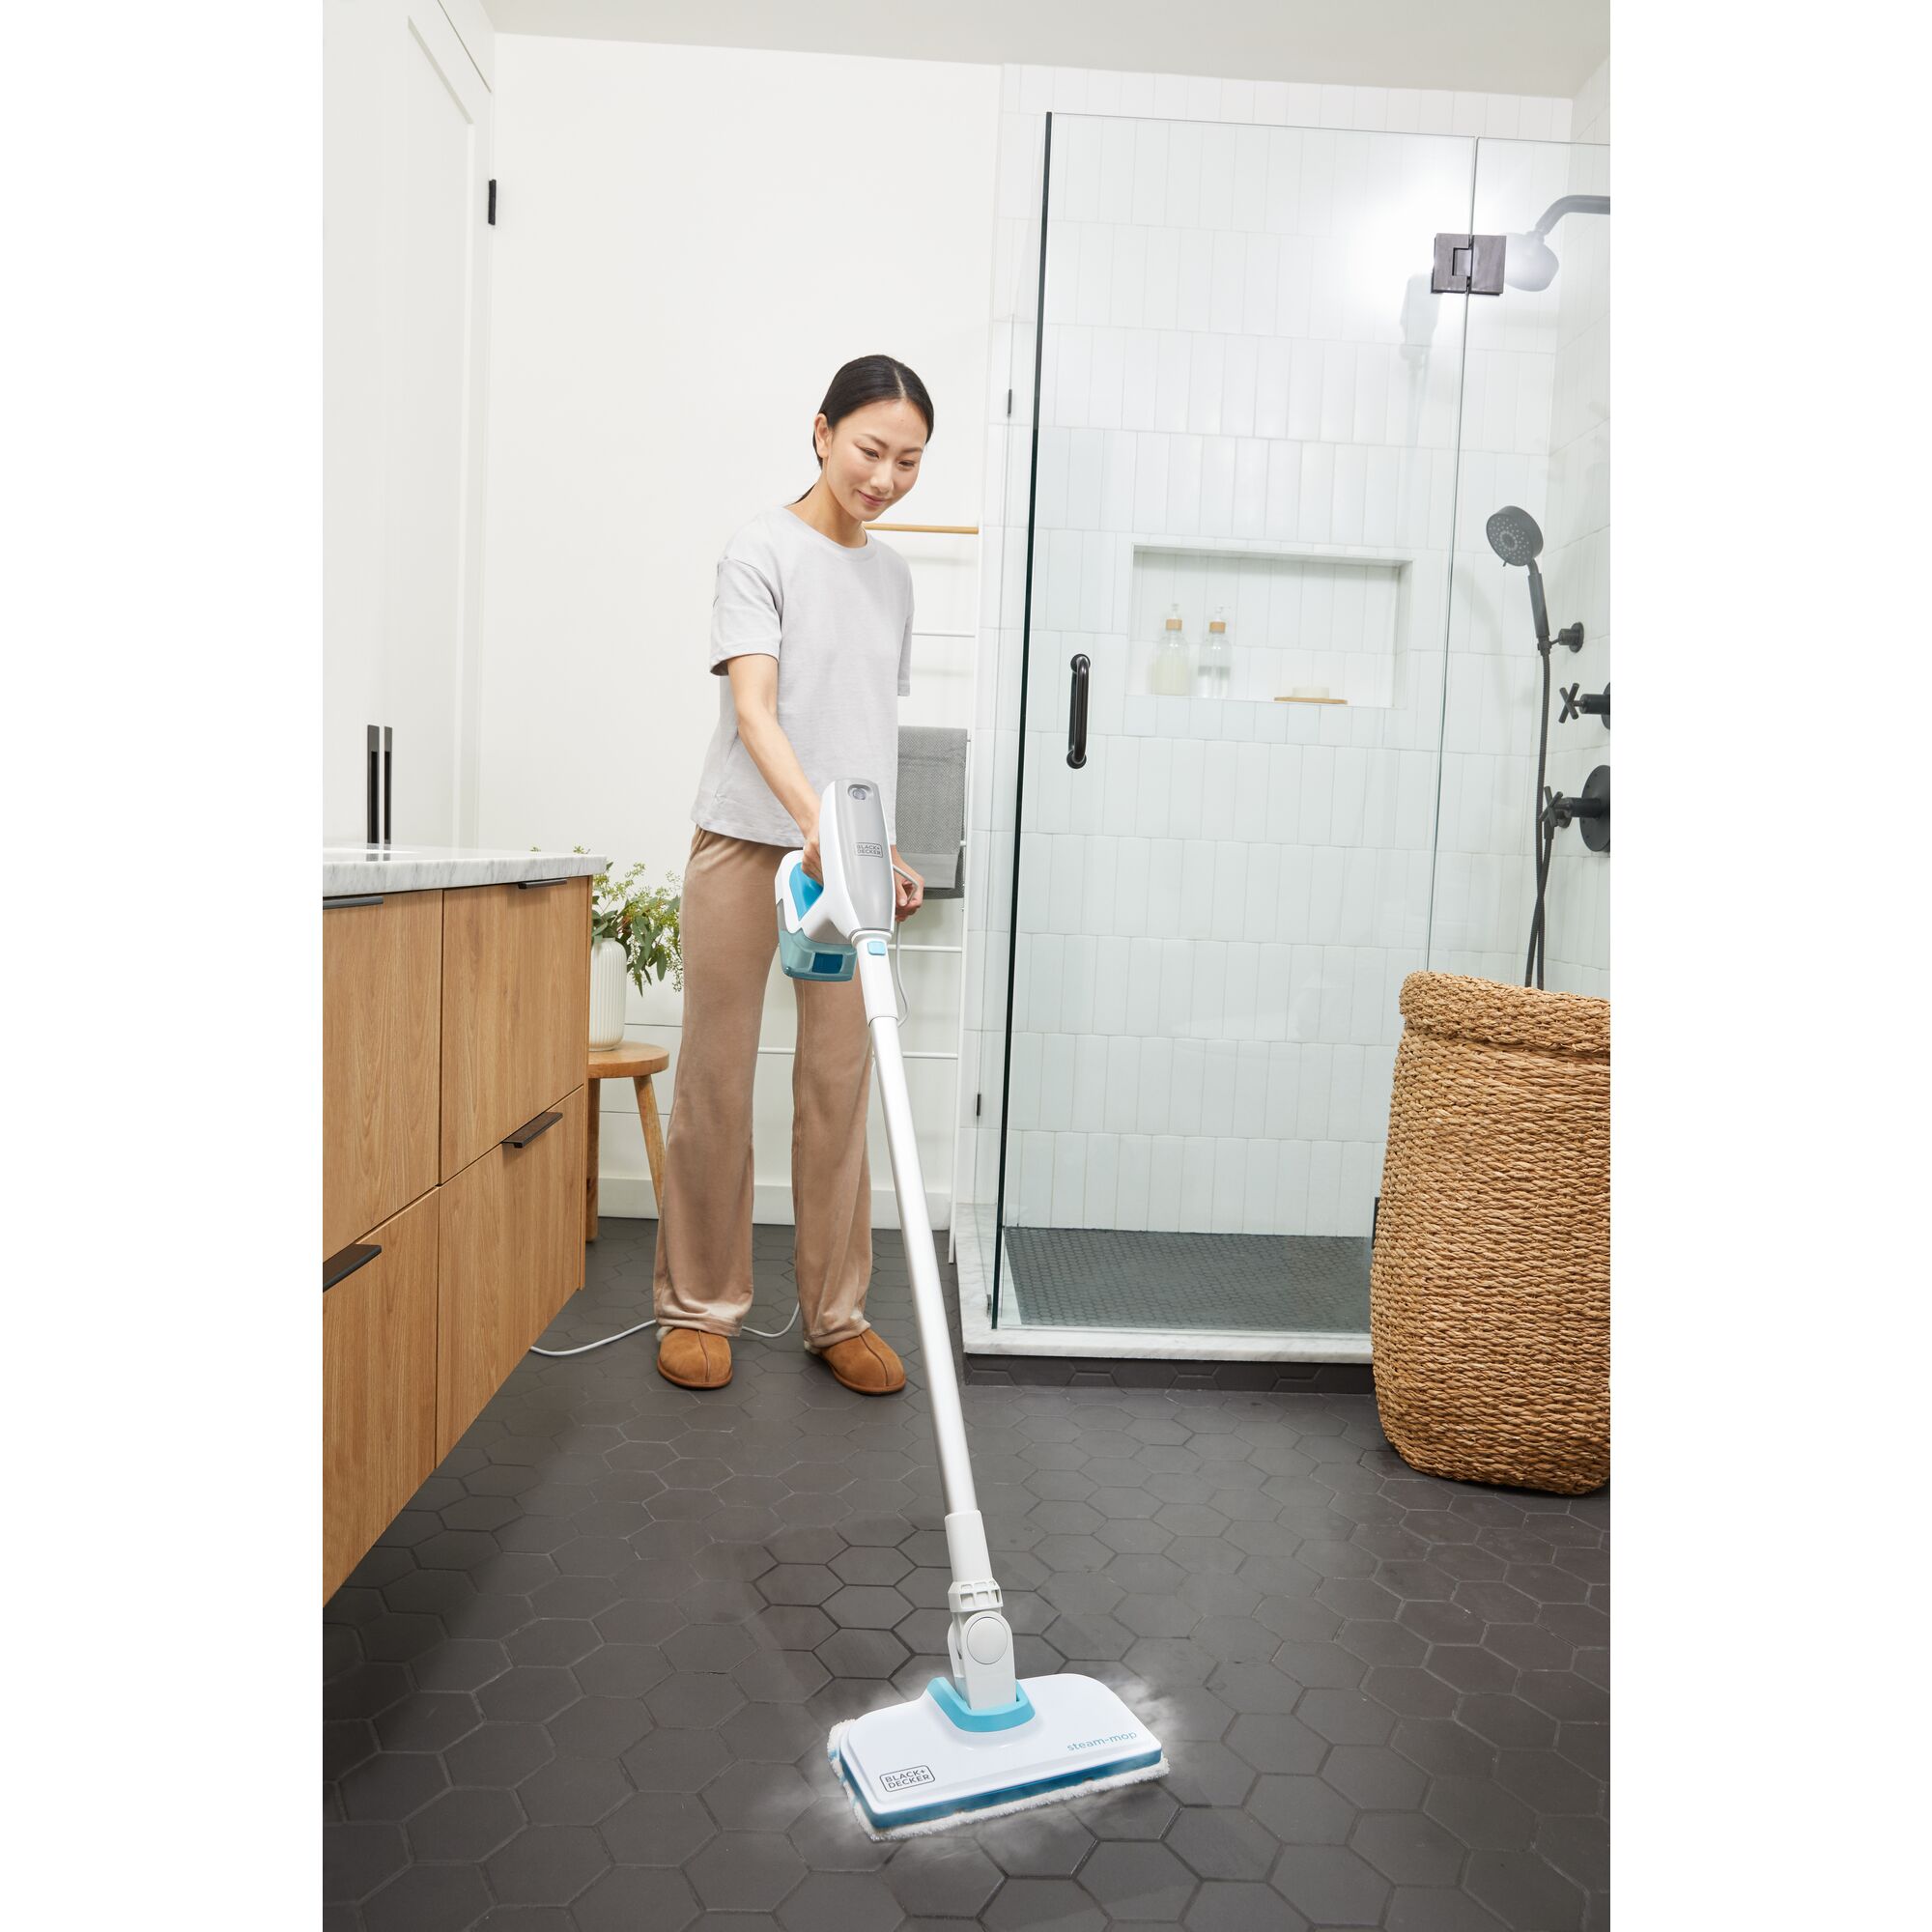 Woman cleaning bathroom floor with steam mop